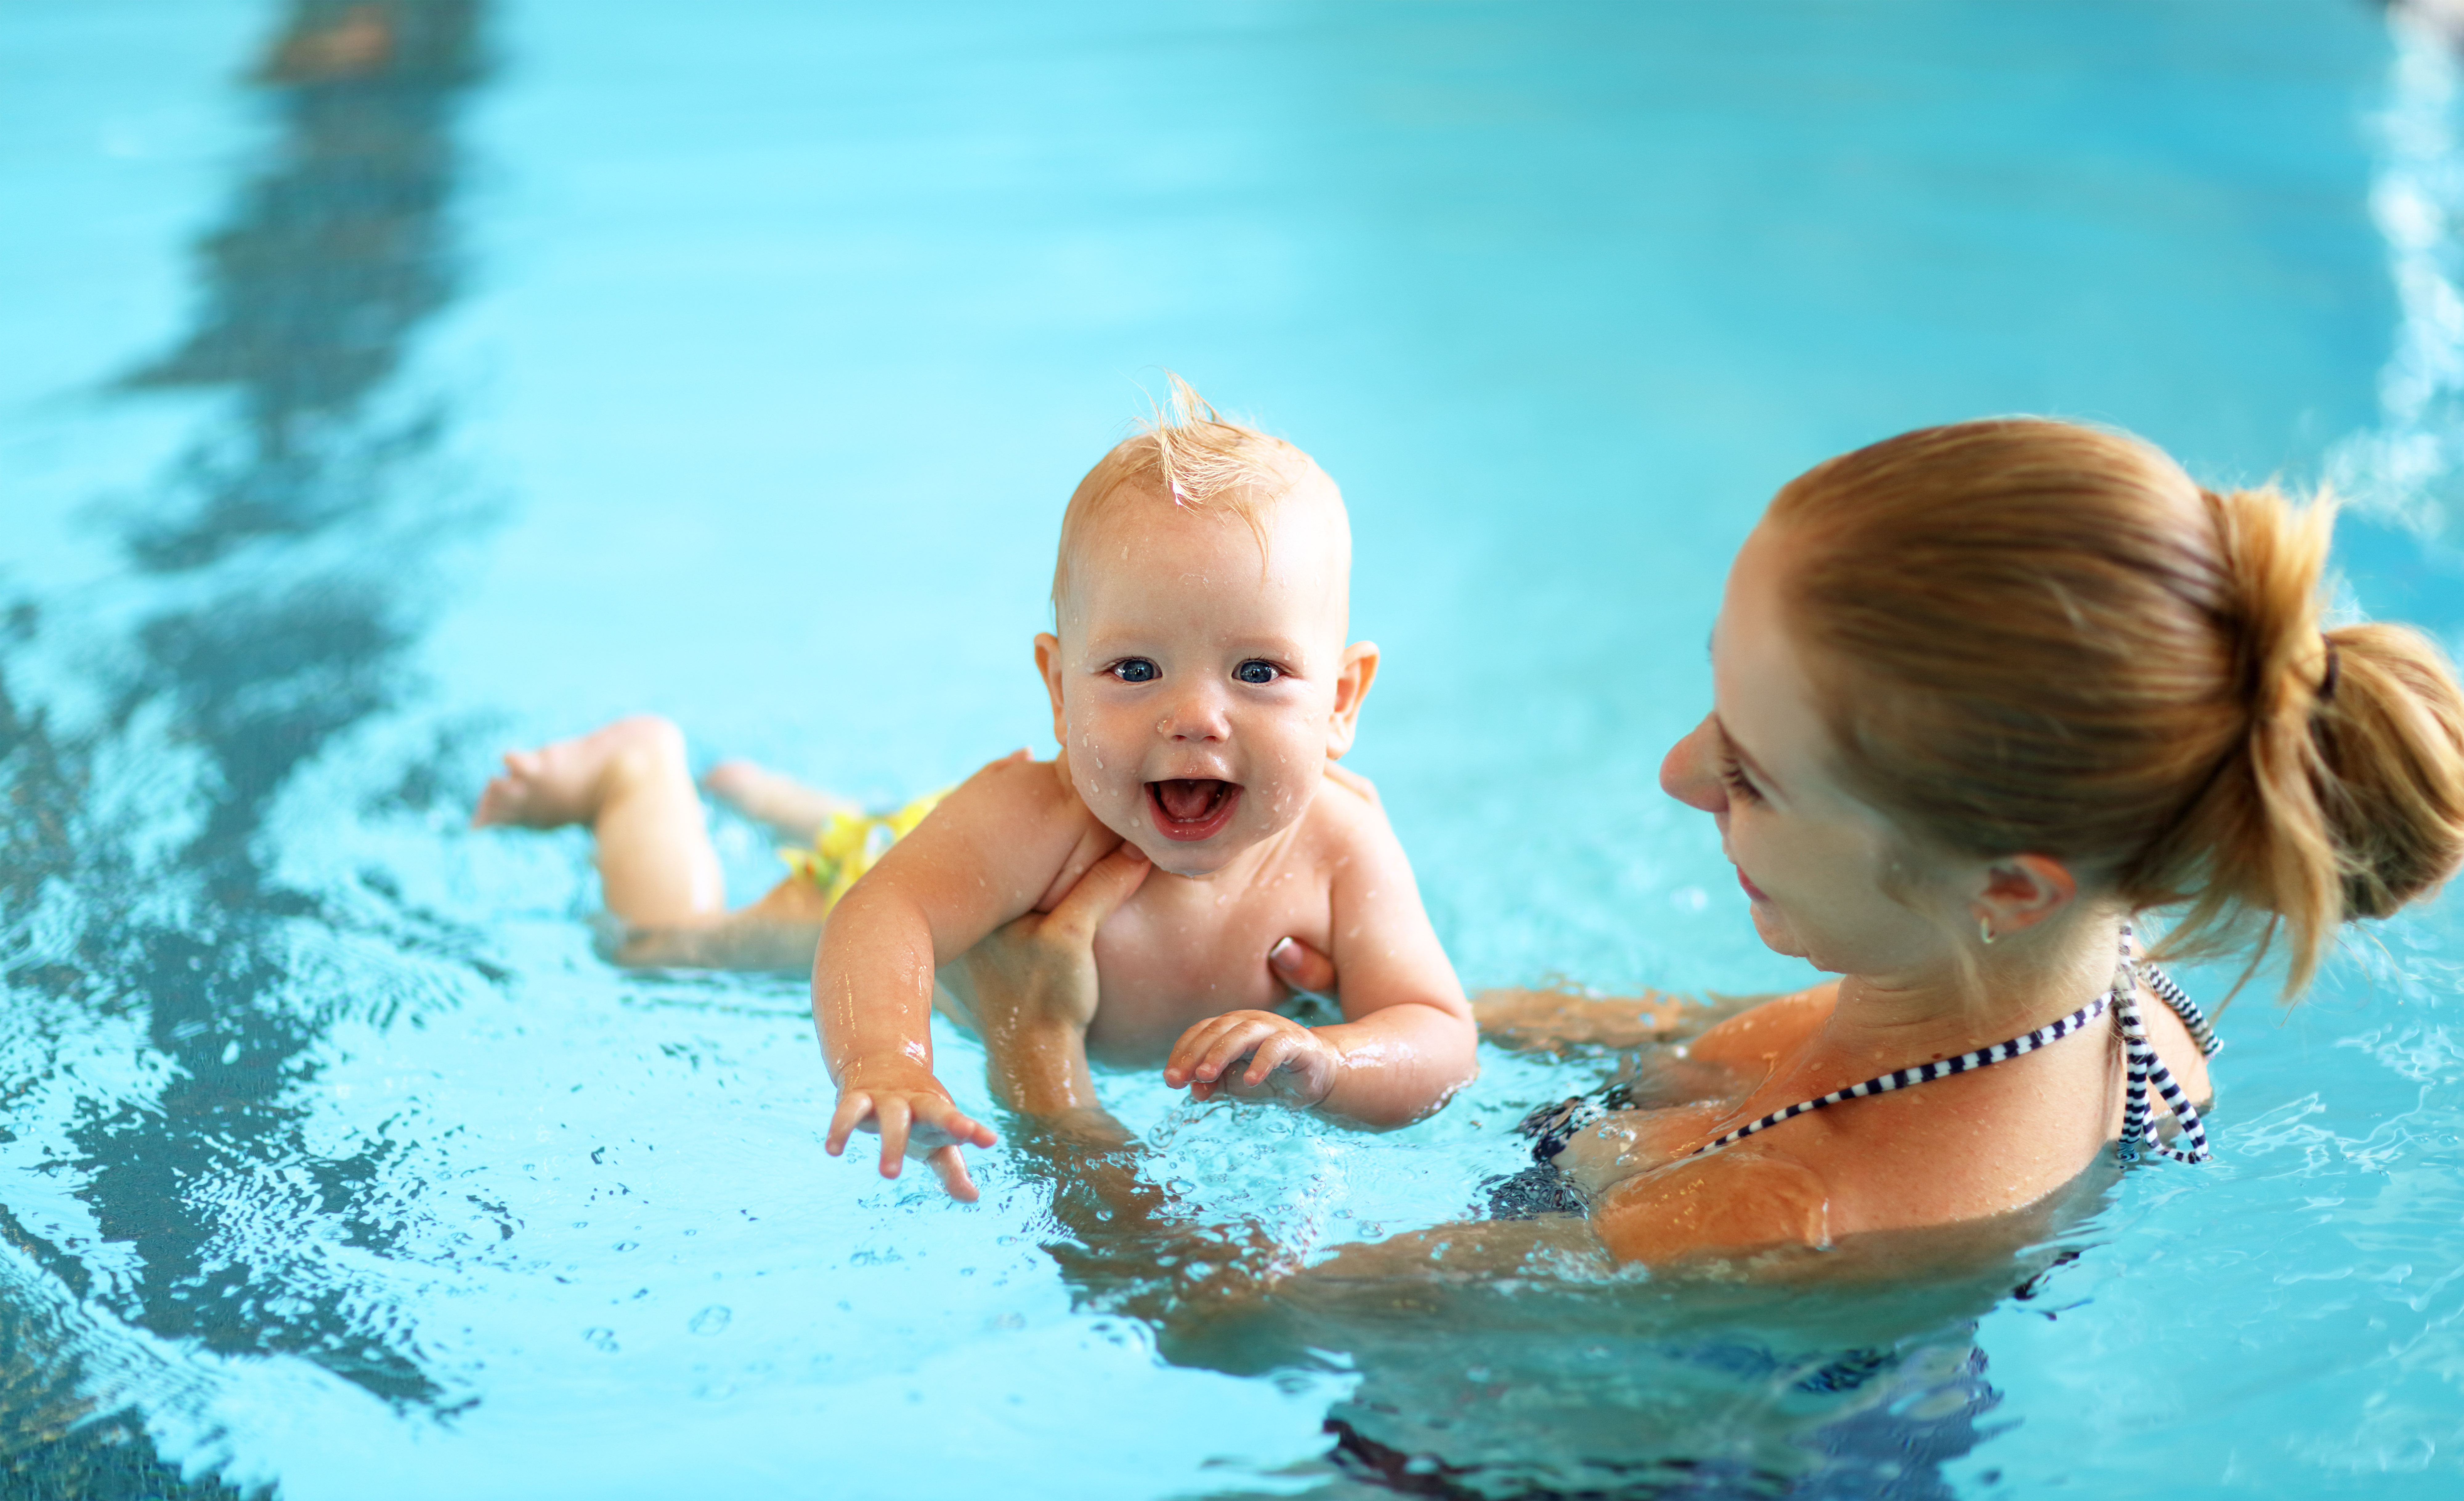 Baby Swim Lessons in Chicago - Bonding for Parents and Babies